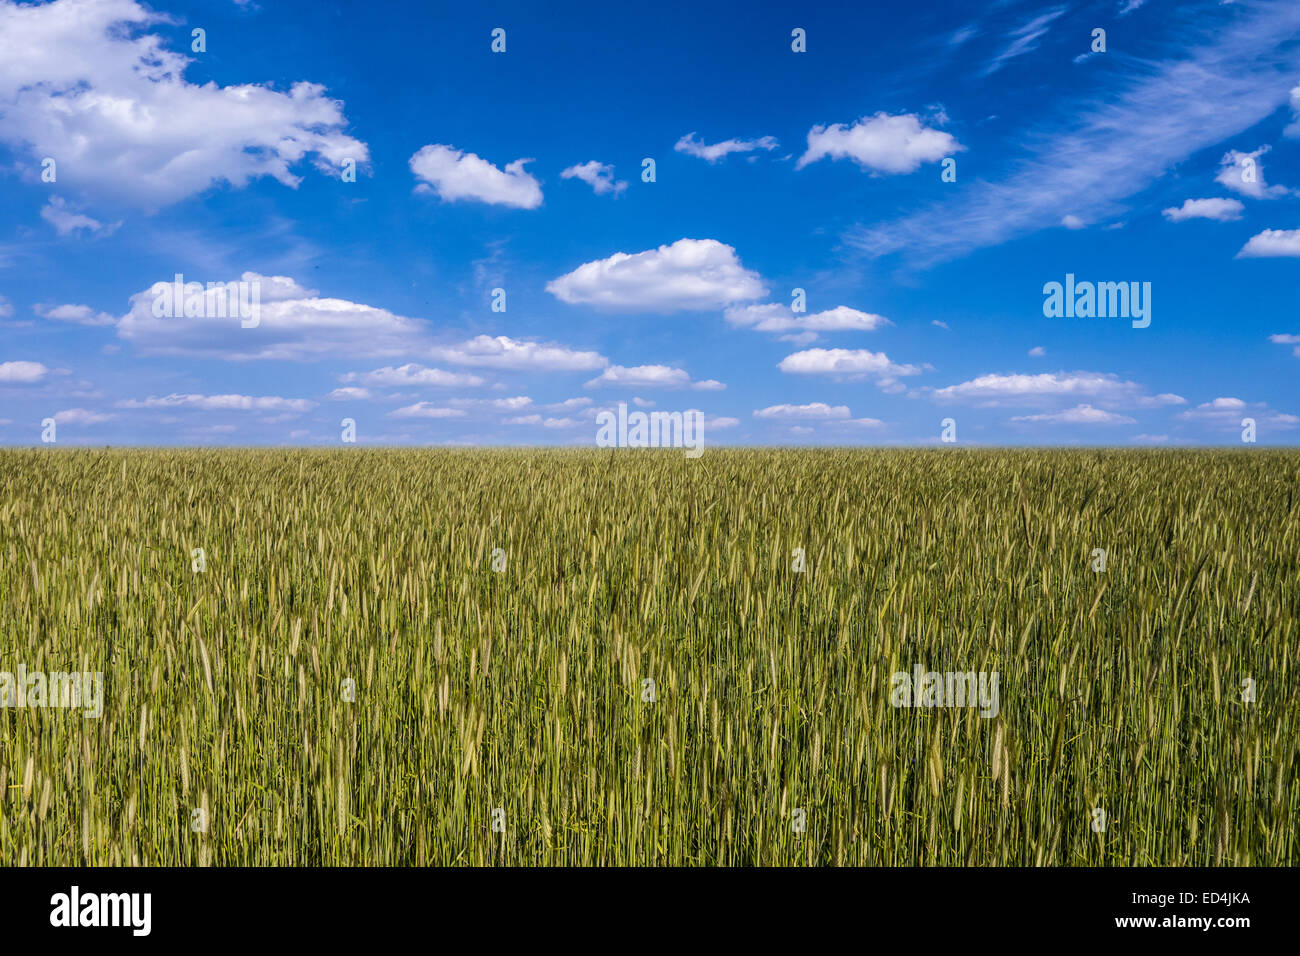 barley field and blue cloudy sky in early summer Stock Photo